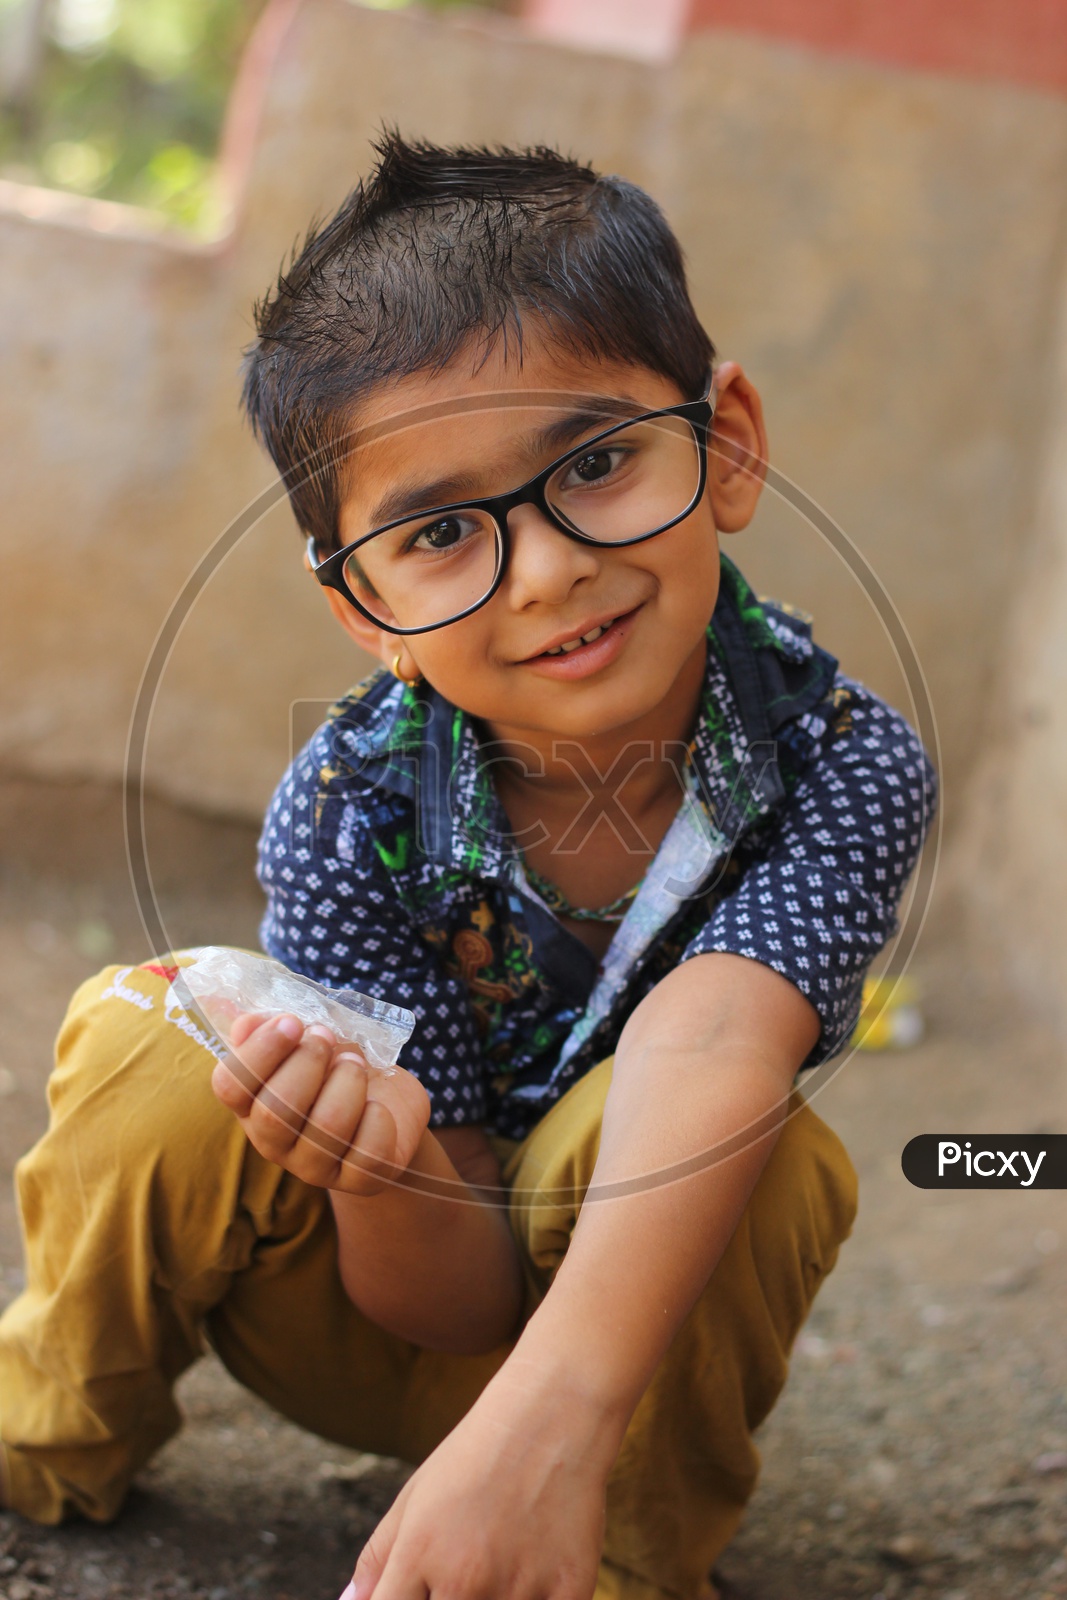 Indian Child on Eyeglass/Spectacles